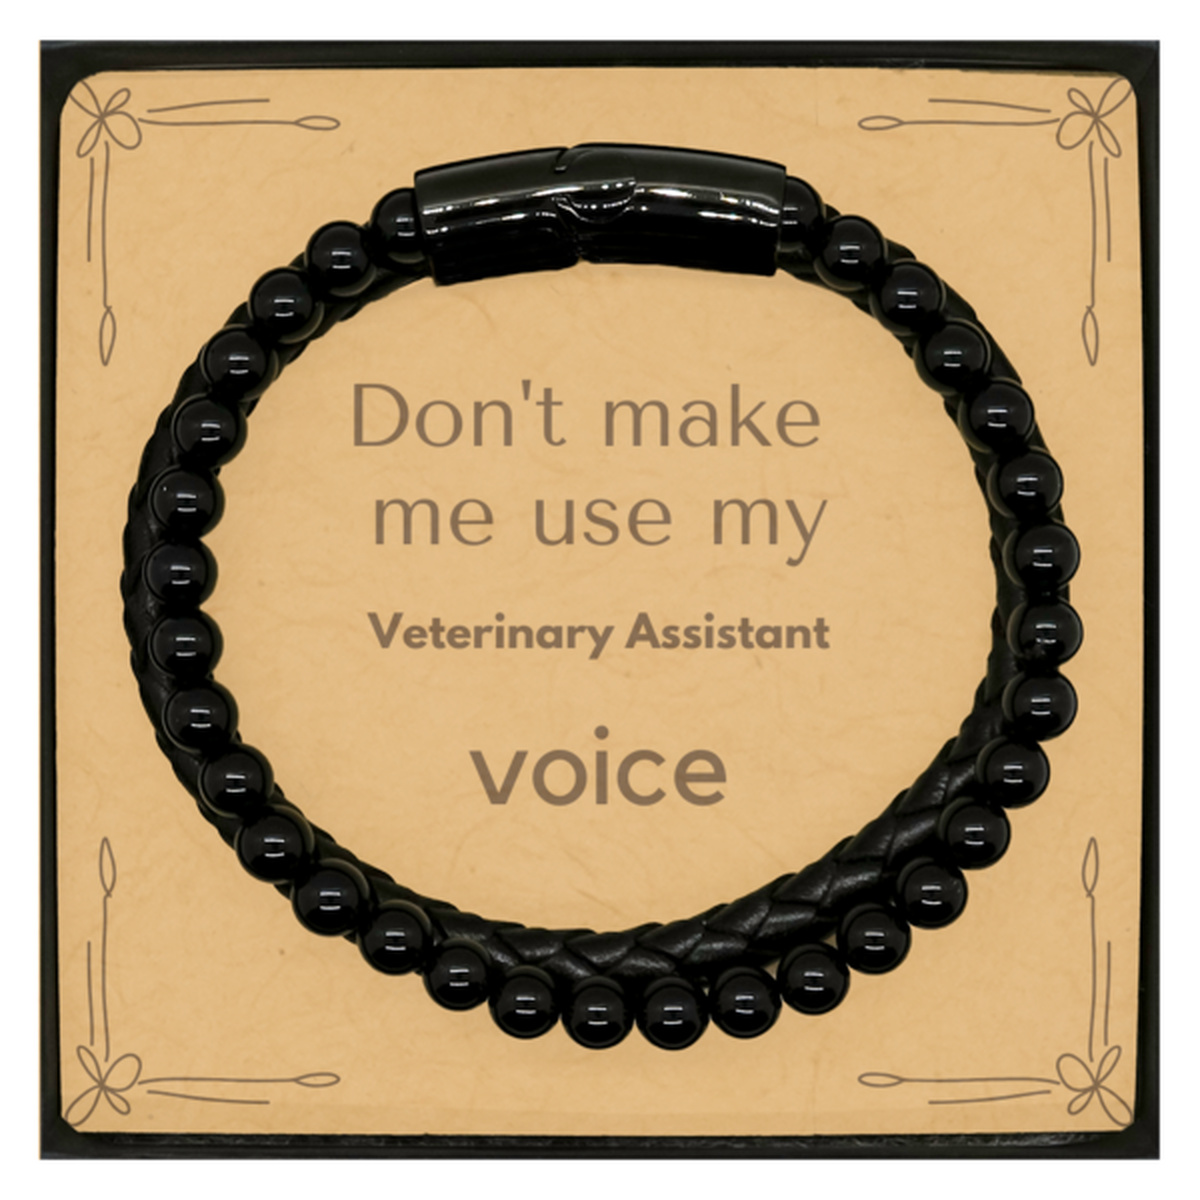 Don't make me use my Veterinary Assistant voice, Sarcasm Veterinary Assistant Card Gifts, Christmas Veterinary Assistant Stone Leather Bracelets Birthday Unique Gifts For Veterinary Assistant Coworkers, Men, Women, Colleague, Friends